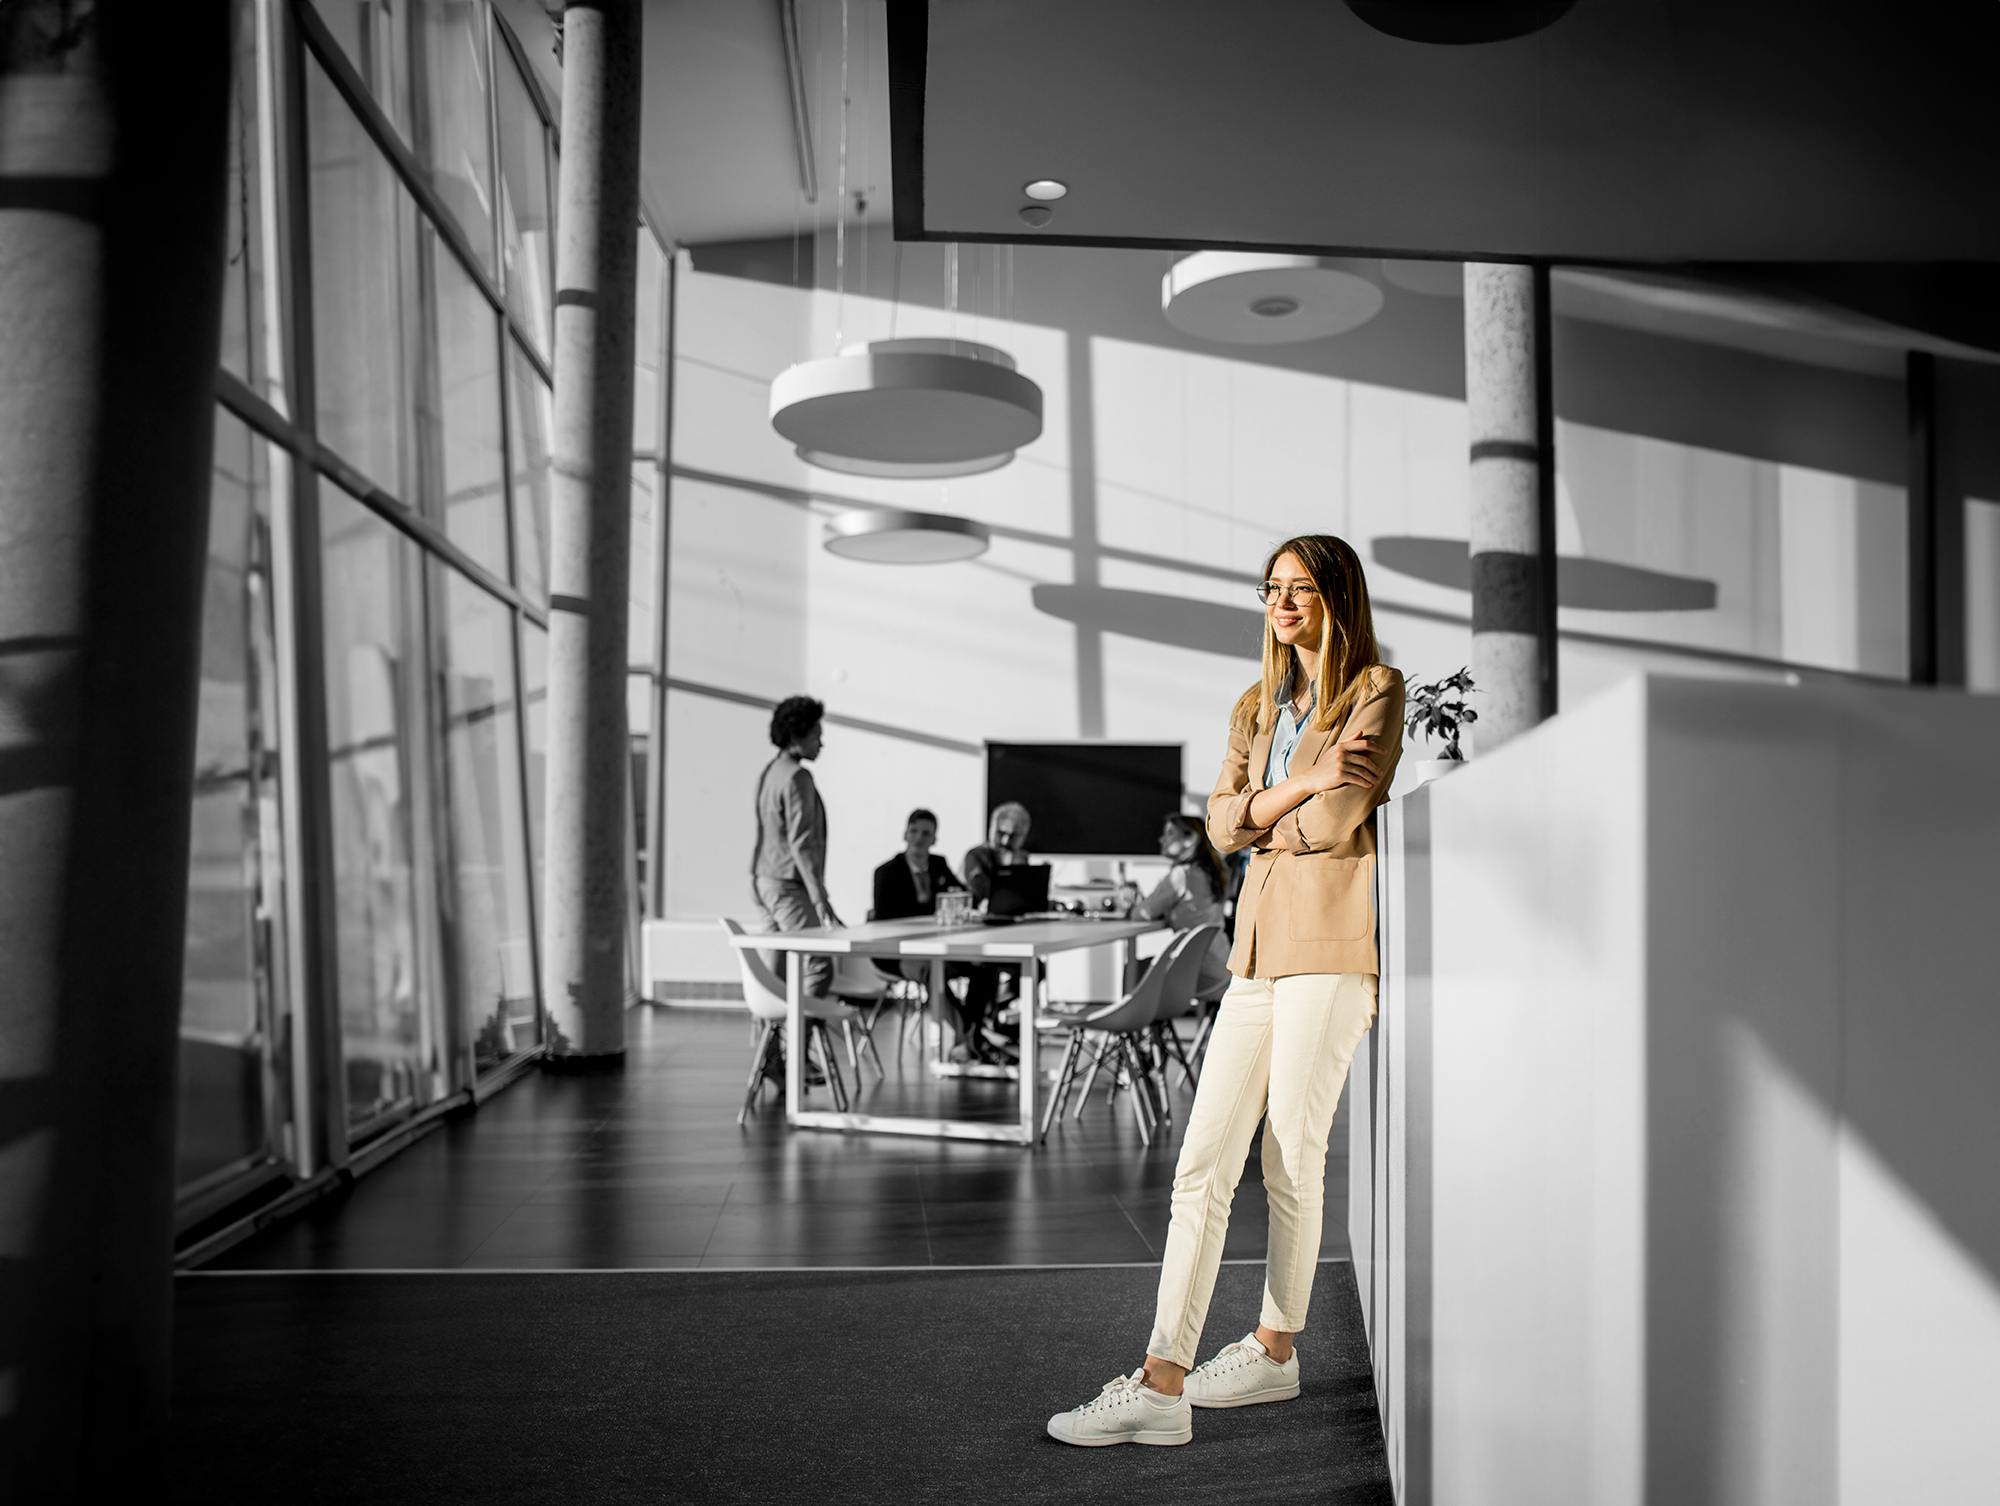 Main Image of woman looking outside - Office space